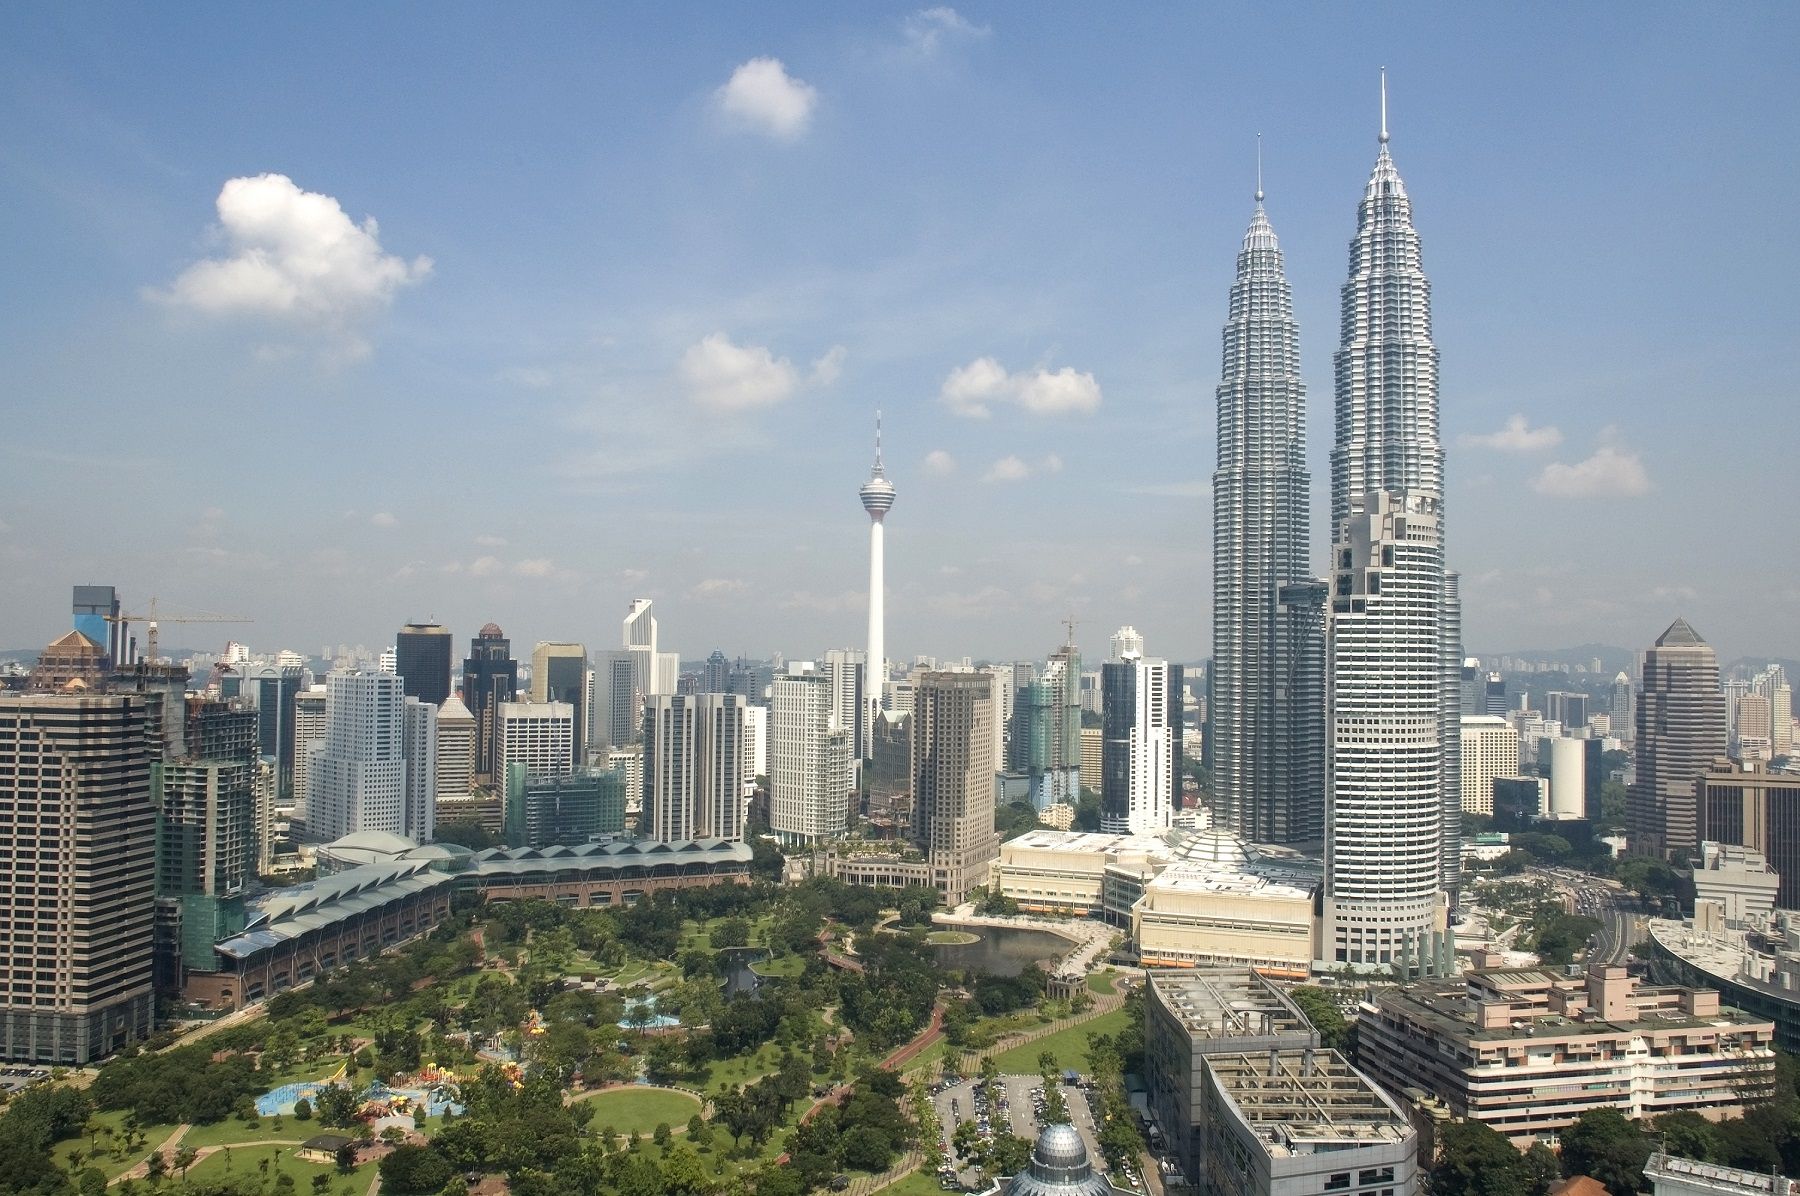 Malaysia Travel Information for the First-Time Visitor